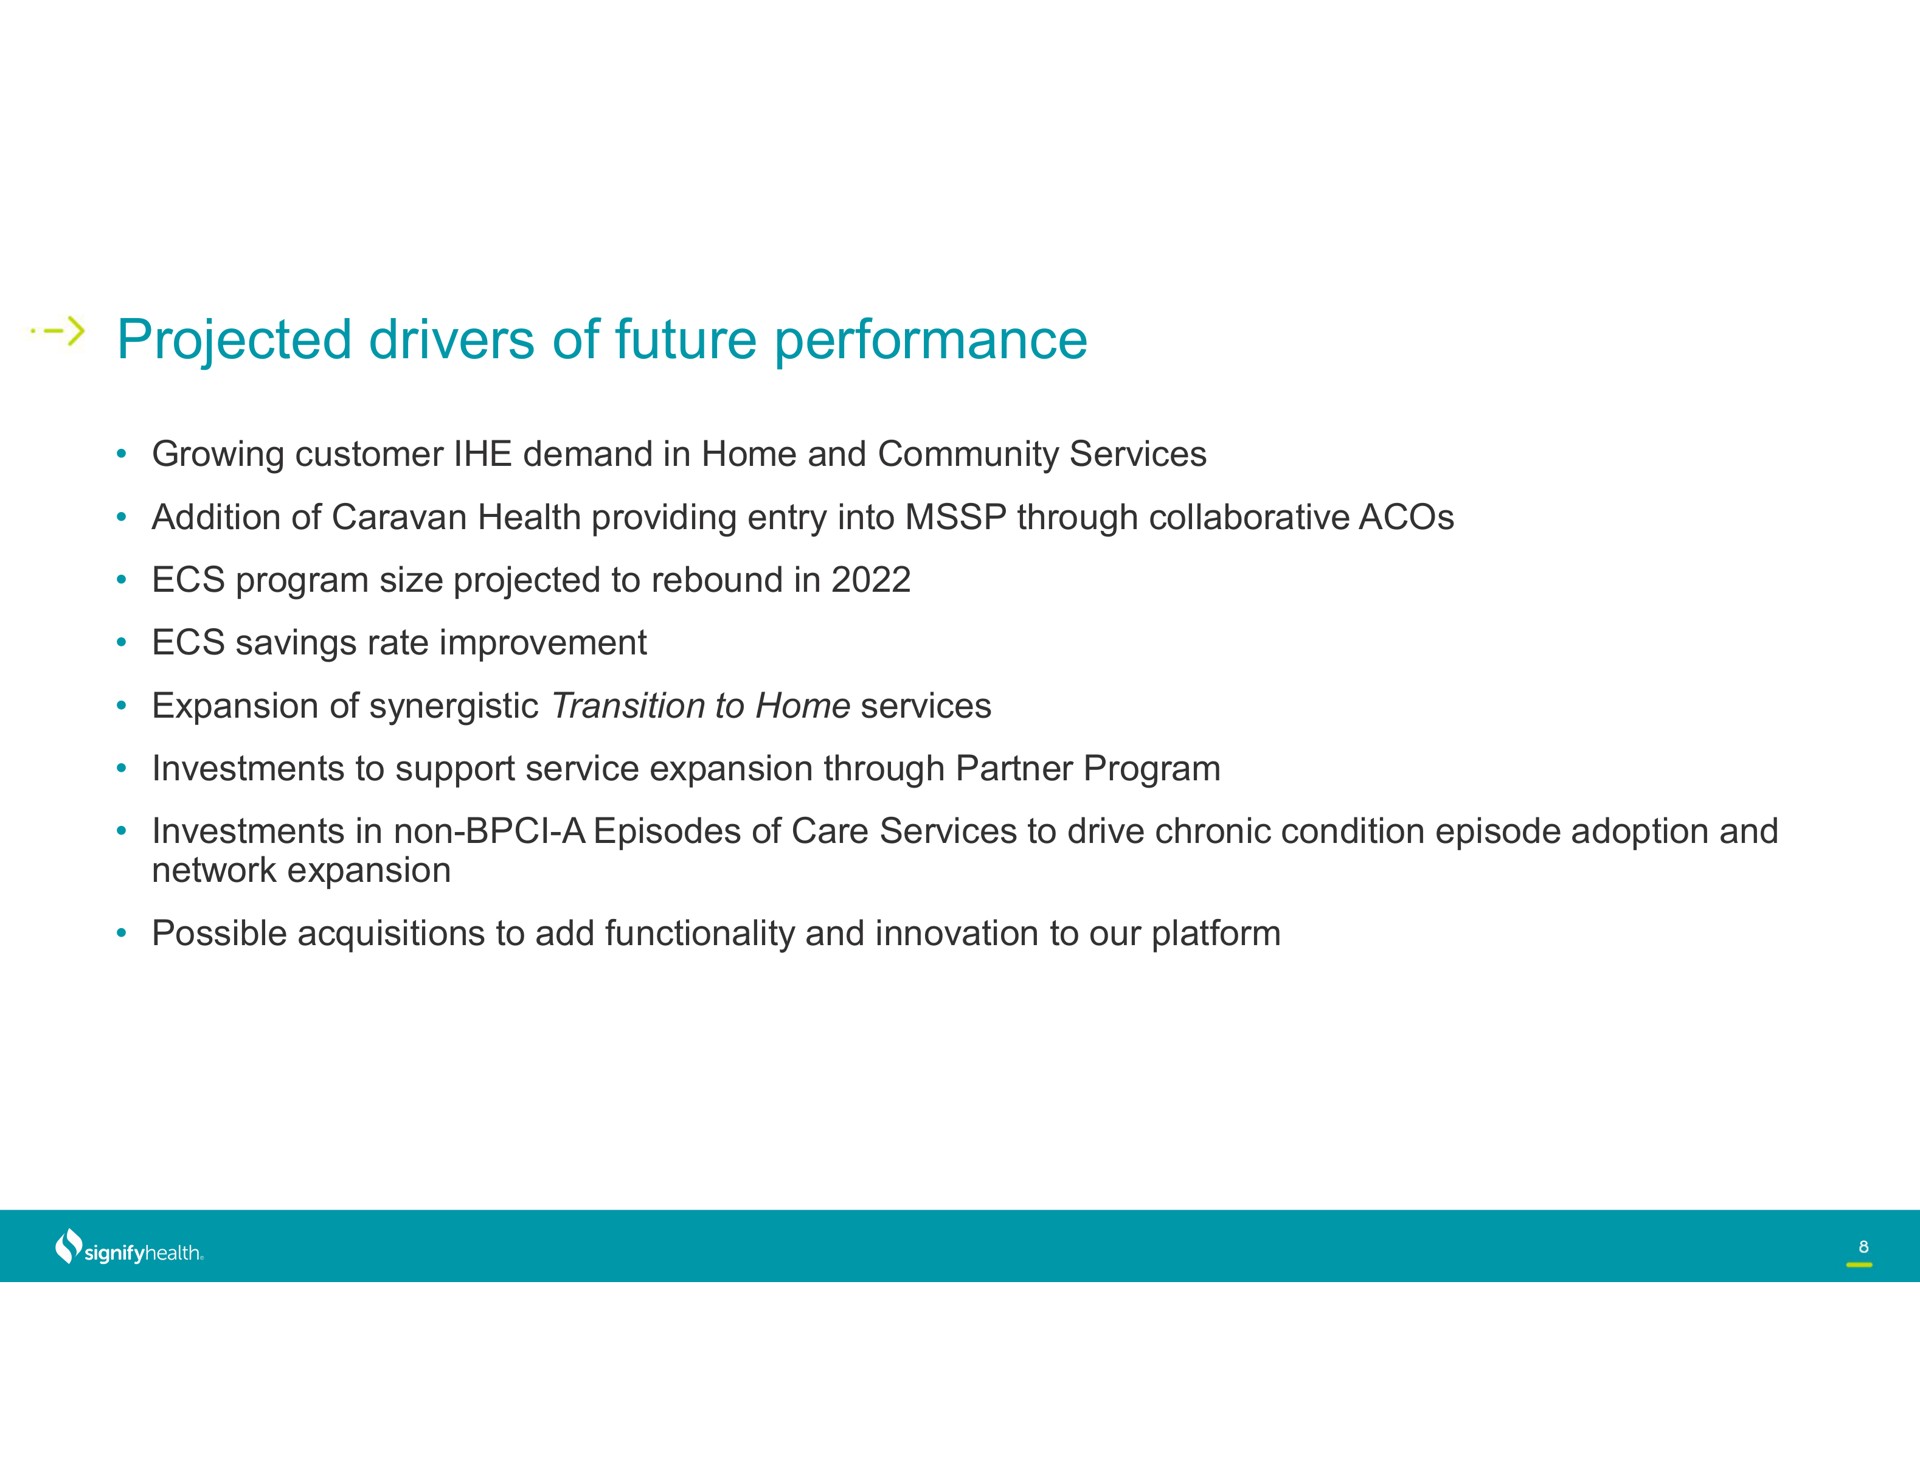 projected drivers of future performance | Signify Health